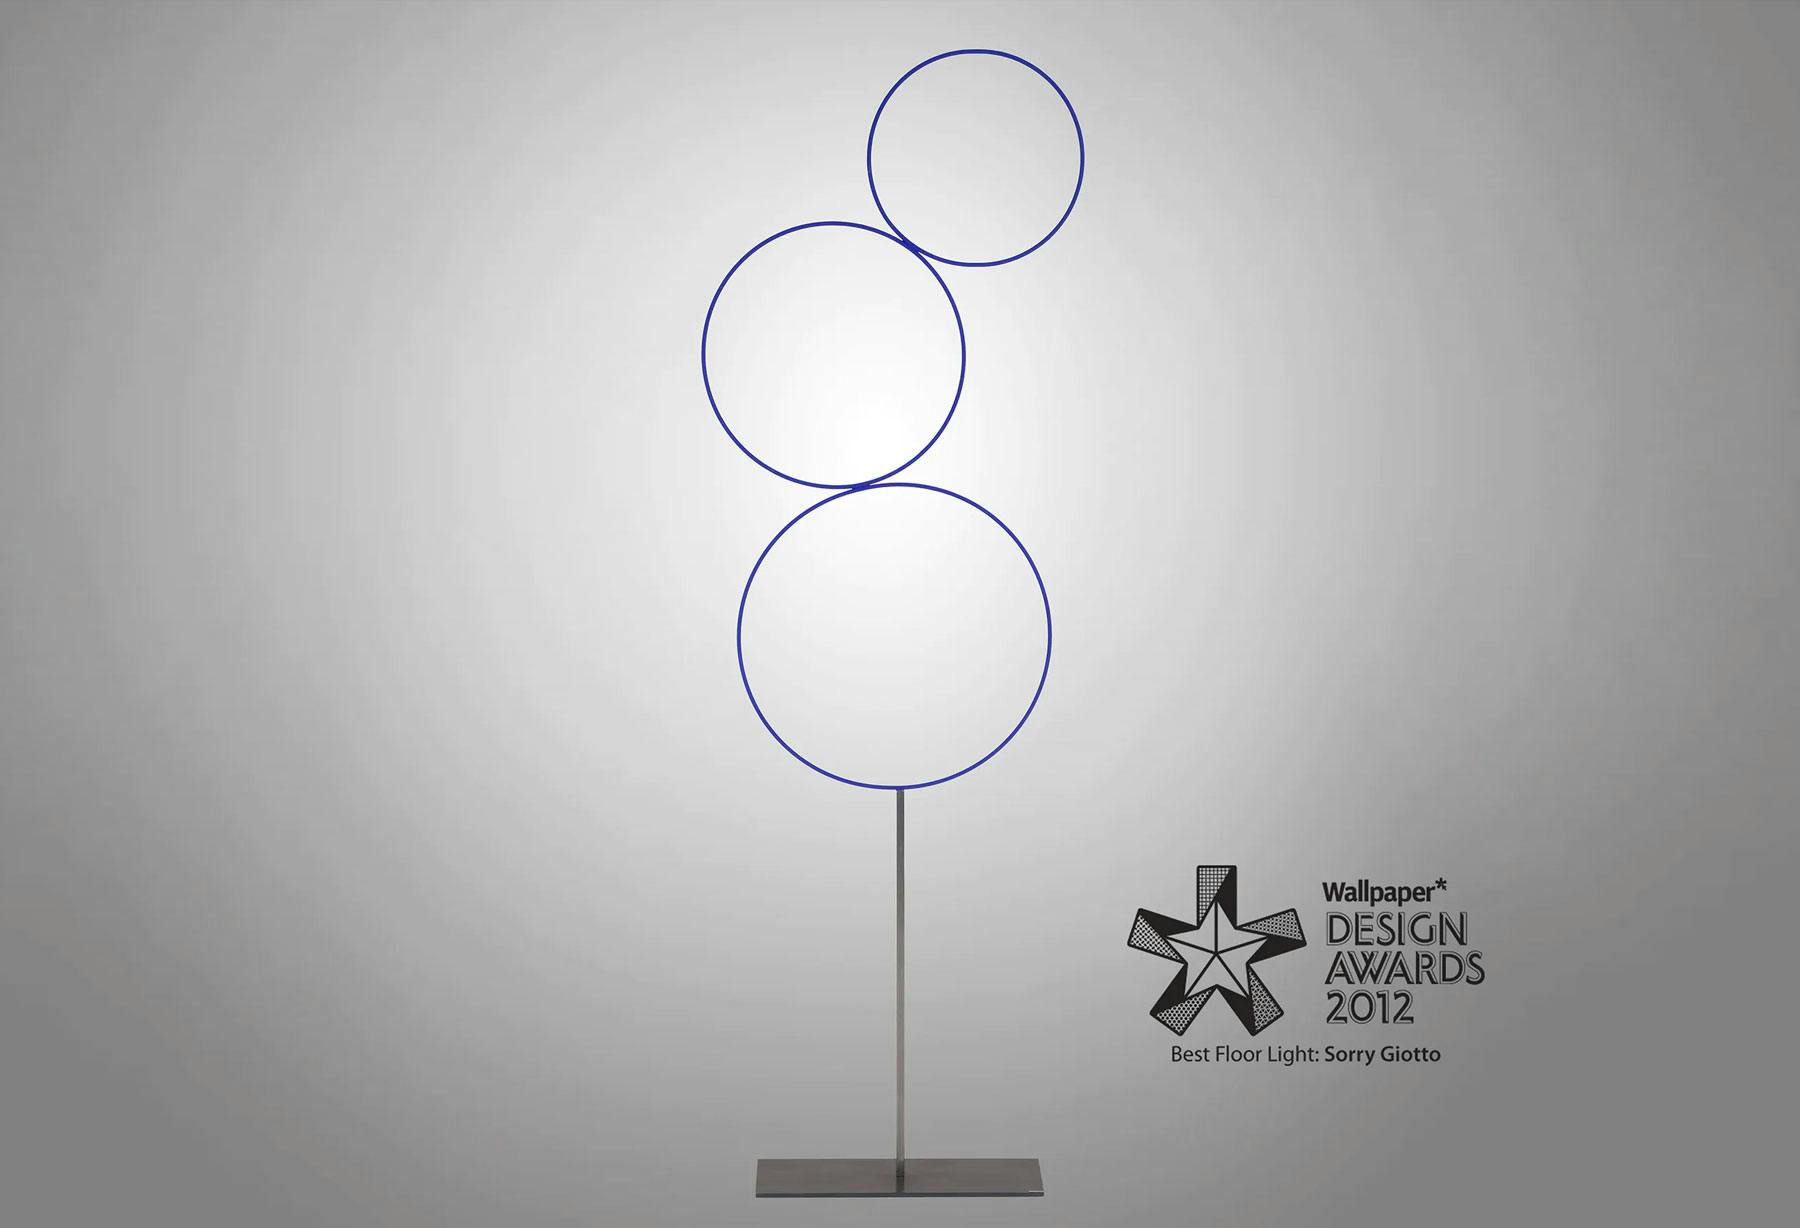 <p>“Sorry Giotto” wins the Wallpaper* Design Award for the Best Floor Light, and ADI selects “Sorry Giotto” for the ADI Design Index 2012.</p>
